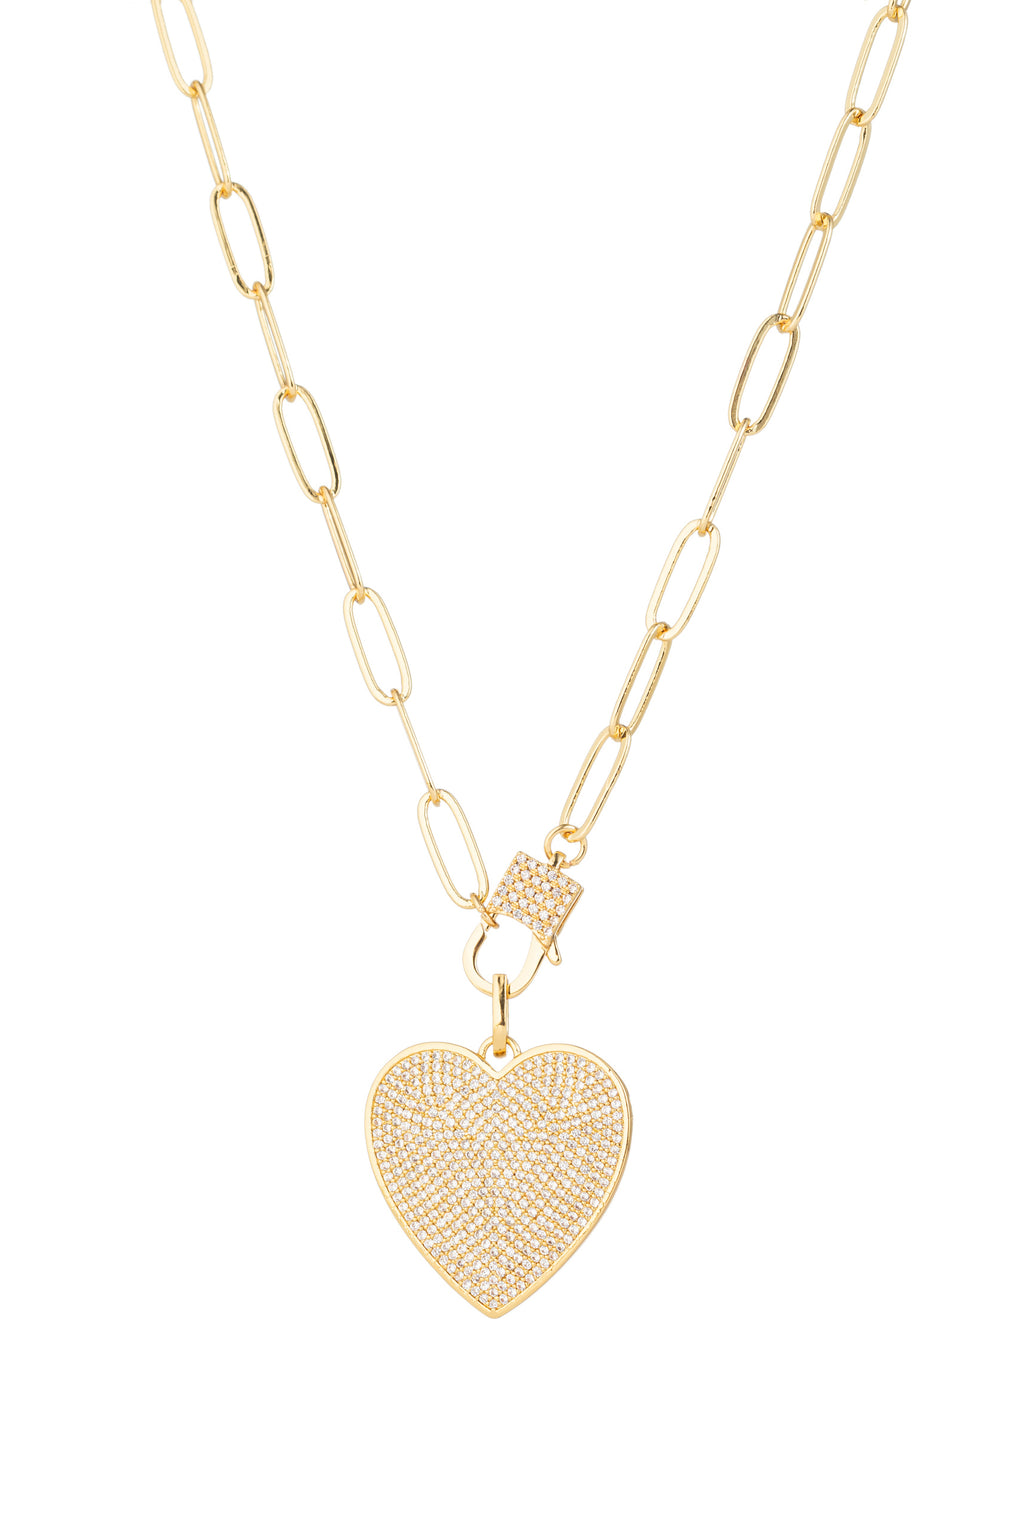 Sterling silver chain necklace with a brass heart pendant studded with cubic zirconia.